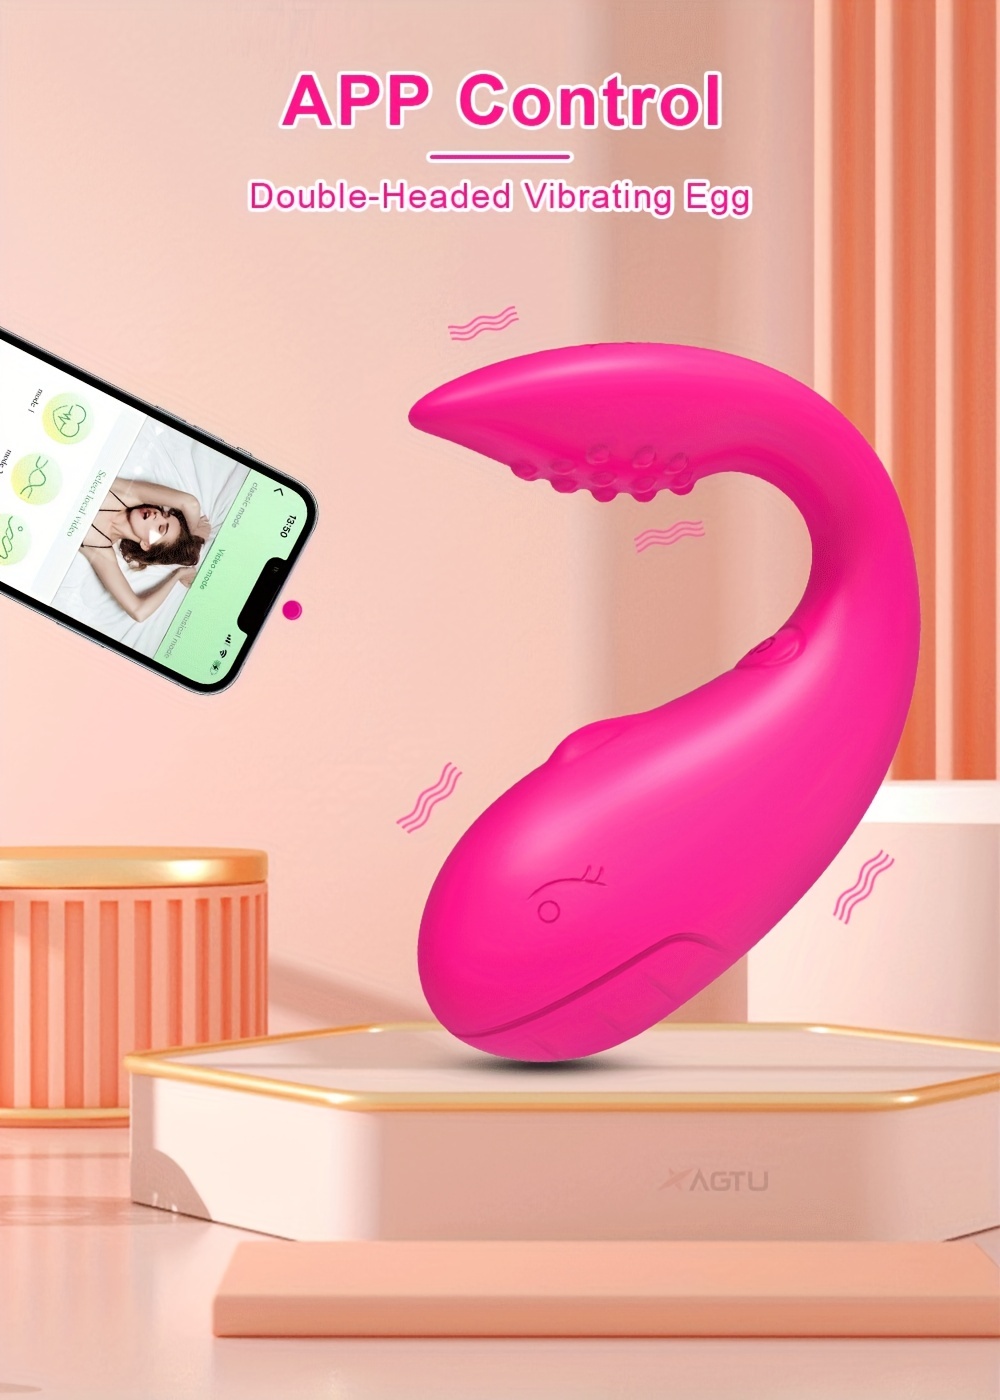 WJL Vibrator for Women Sex with Vibration App Remote Control